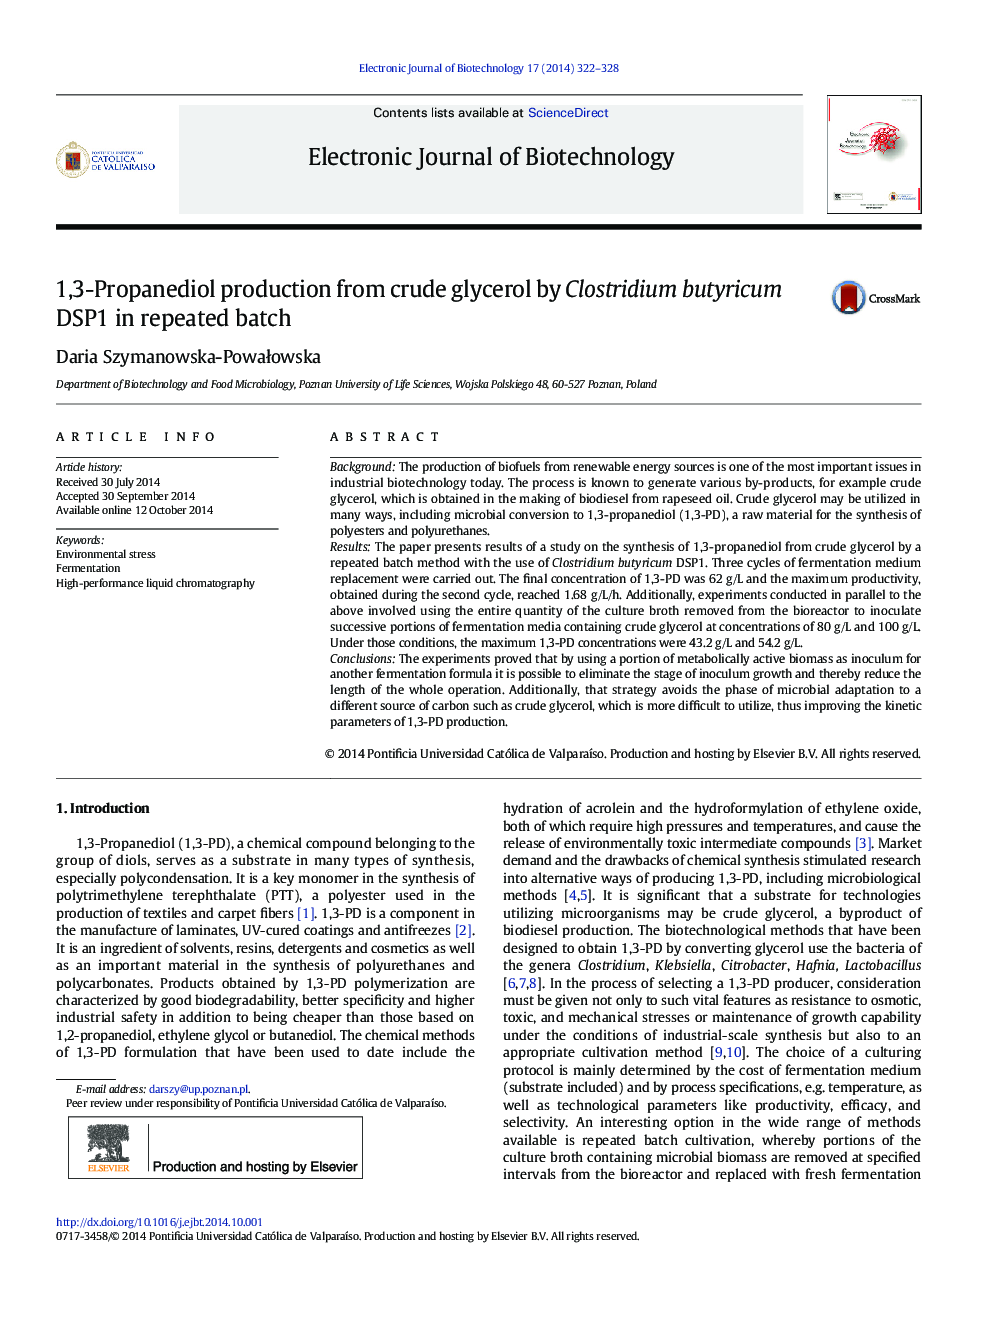 1,3-Propanediol production from crude glycerol by Clostridium butyricum DSP1 in repeated batch 